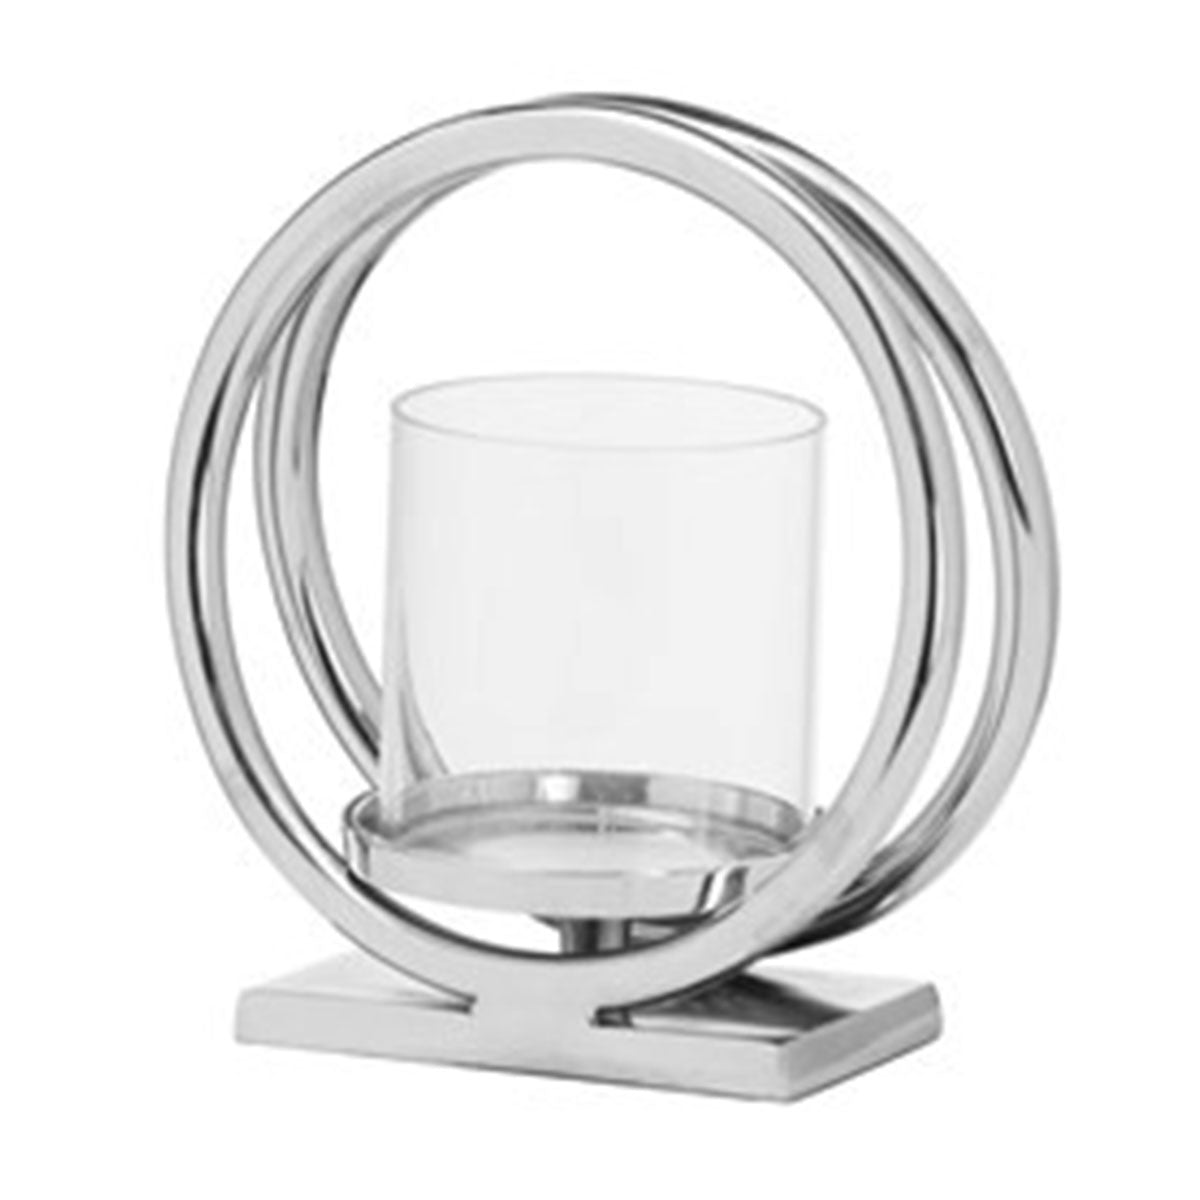 Ohlson Silver Large Twin loop Candle Holder